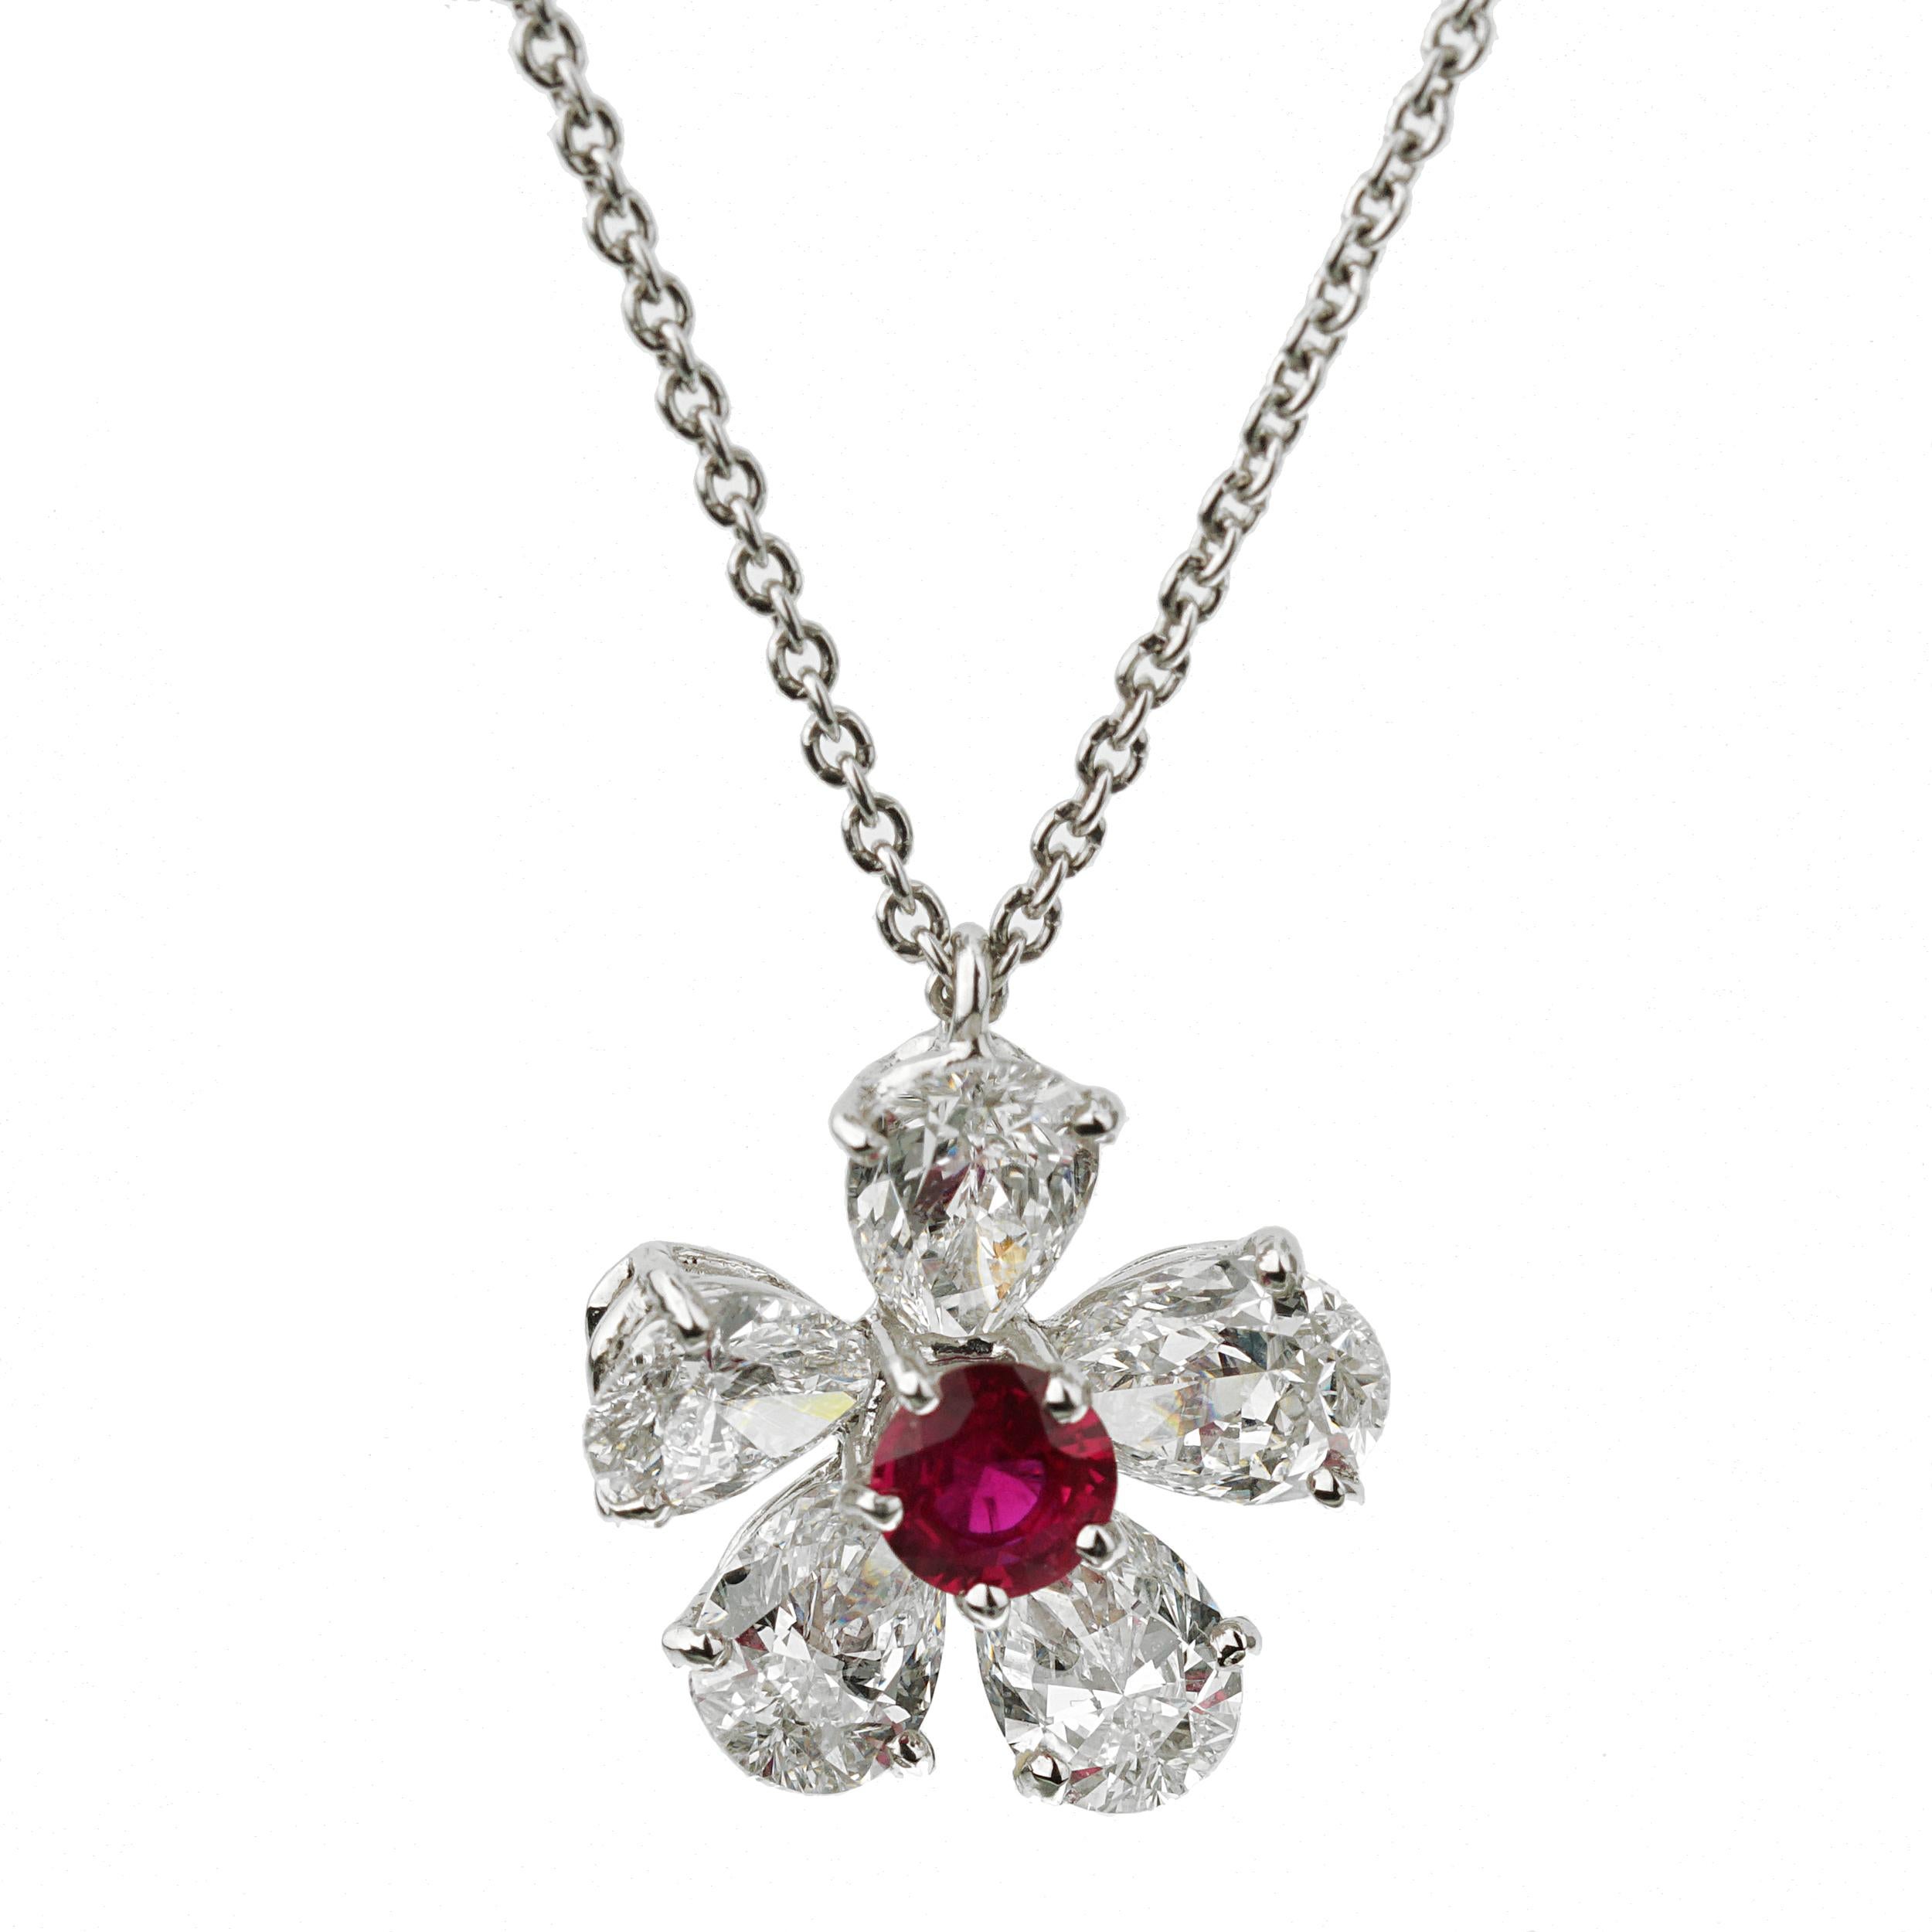 An iconic authentic Graff pendant necklace showcasing 5 pear shaped diamonds surrounding a ruby in a floral motif. The pendant and necklace are platinum, with a total length of 17